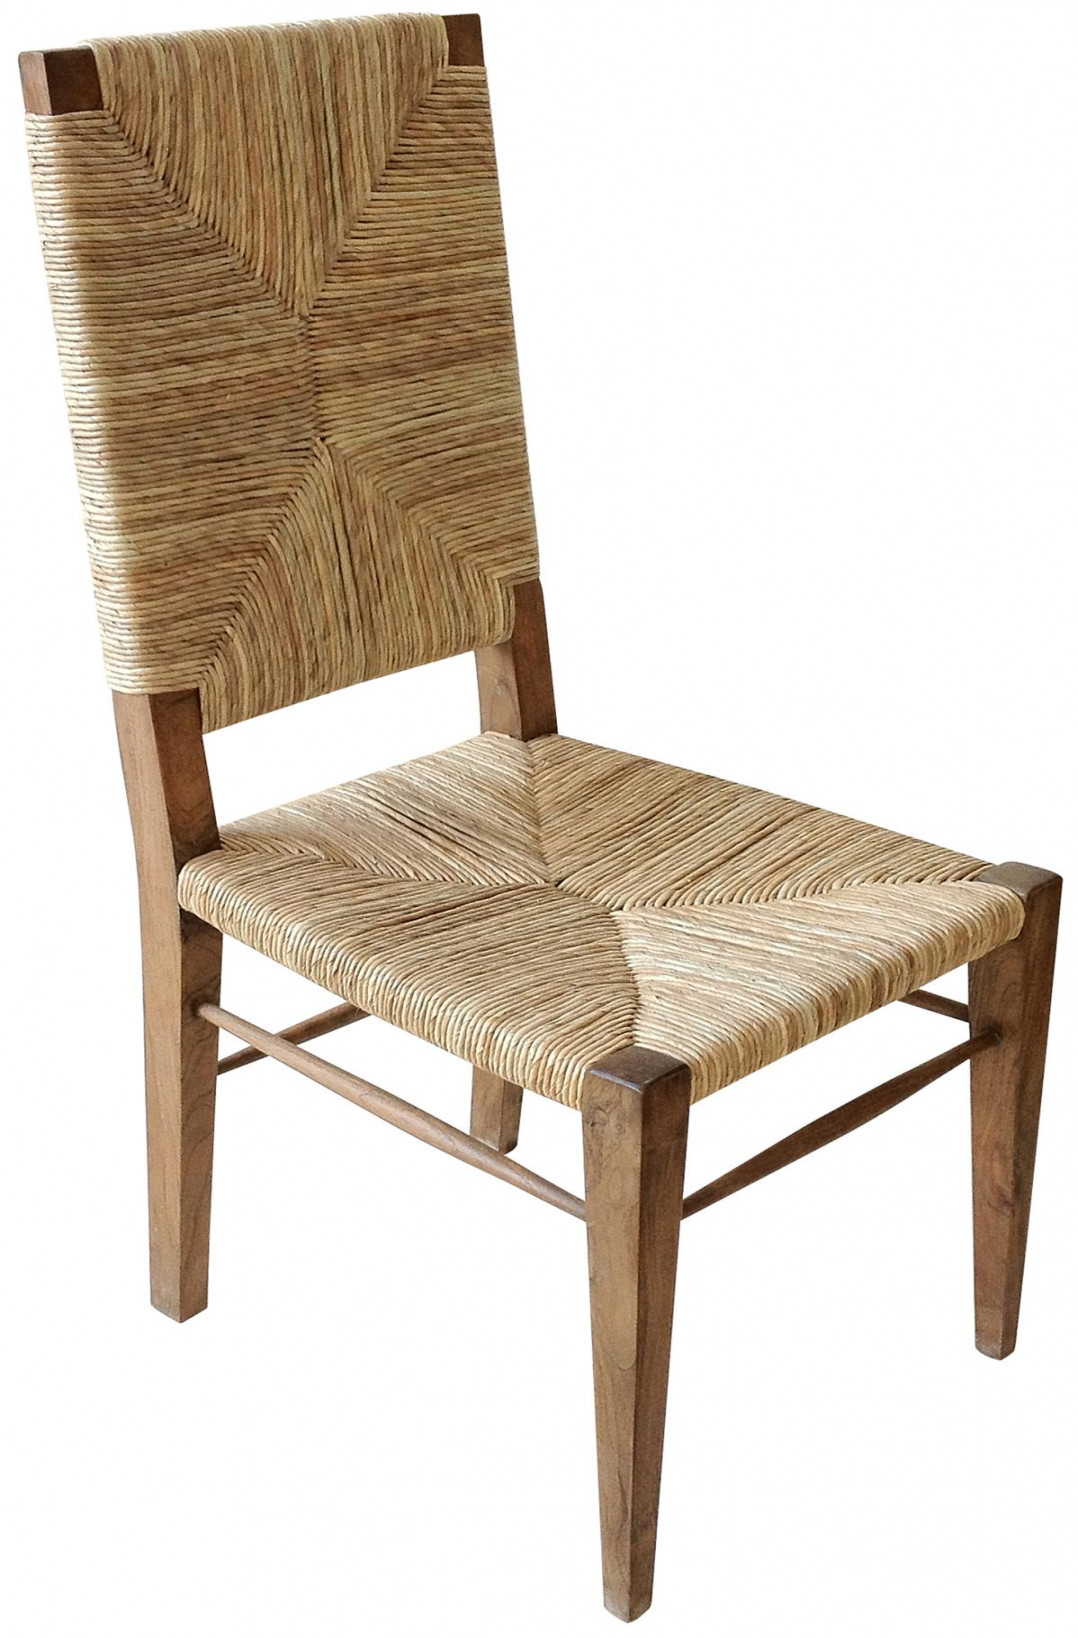 Large Stewart Teak and Seagrass Dining Chair